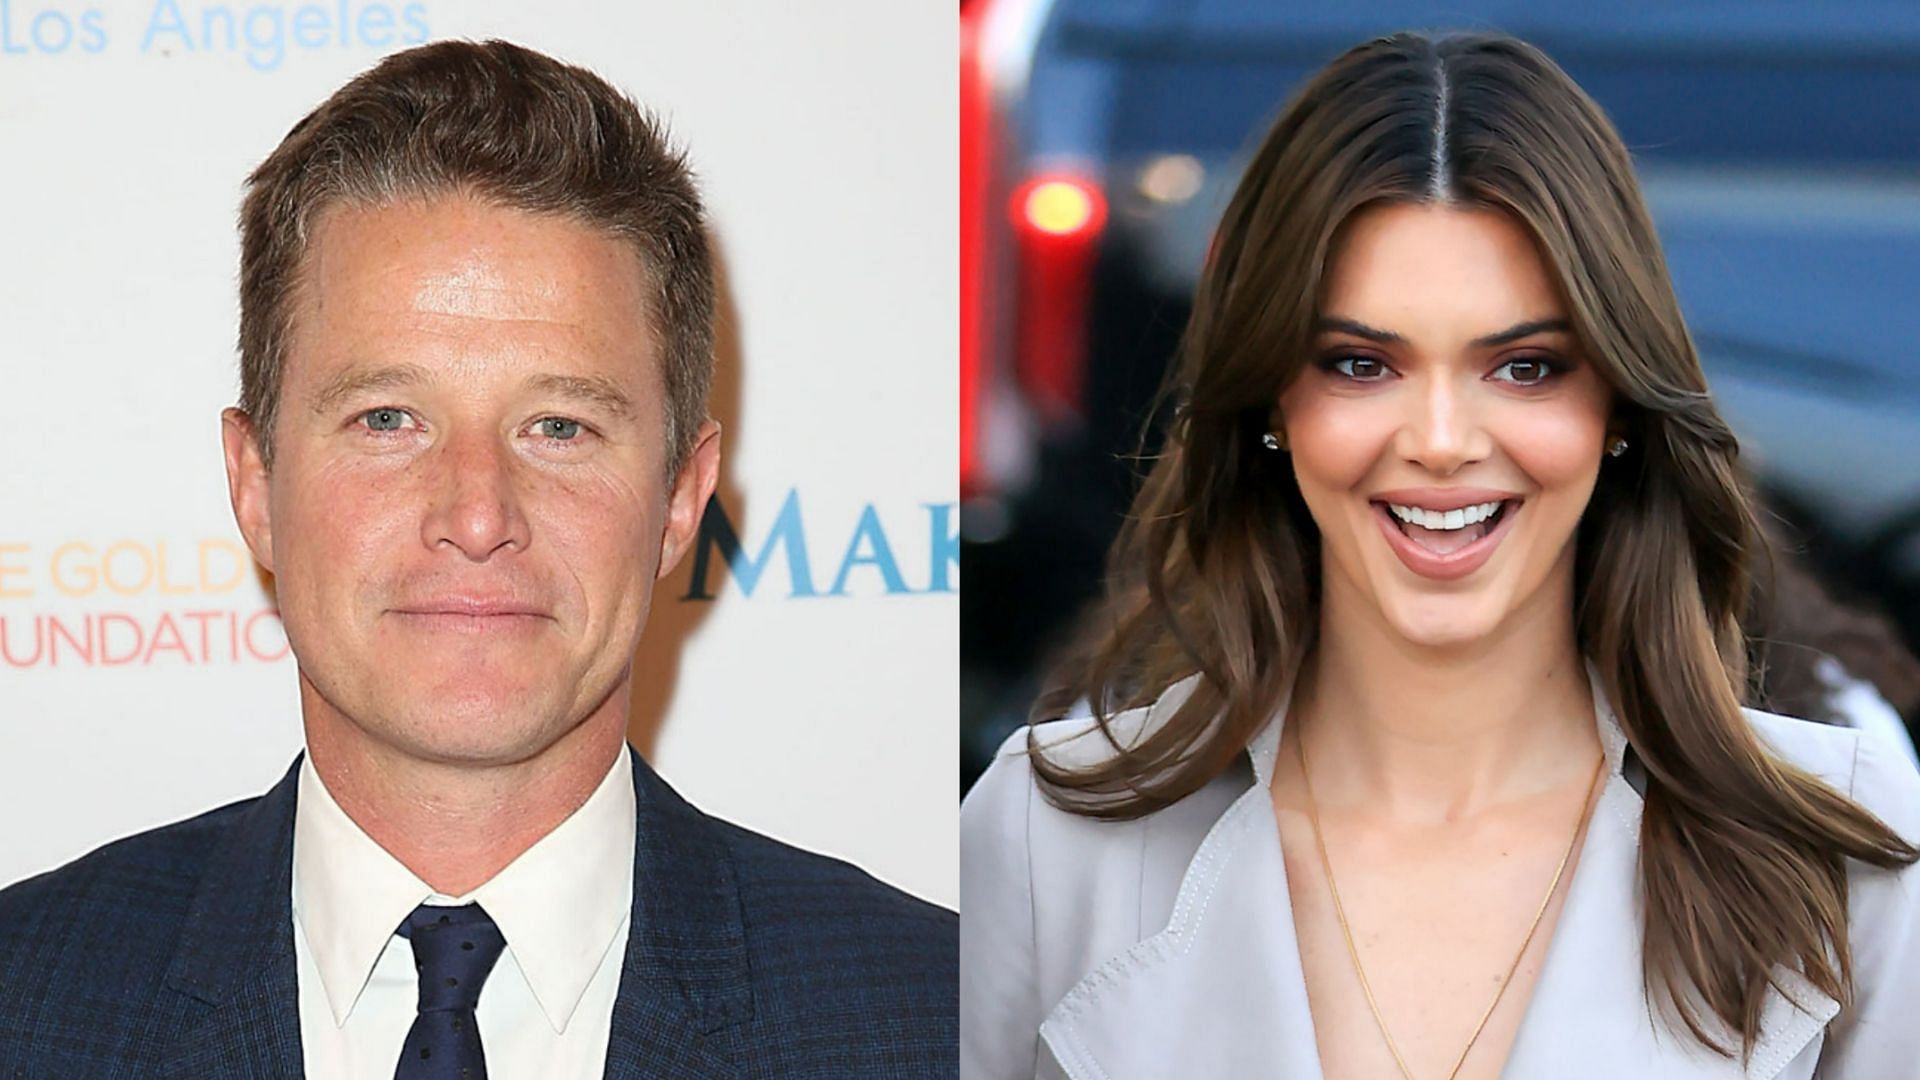 Billy Bush exposed for making inappropriate comments towards Kendall Jenner (Images via Getty Images)